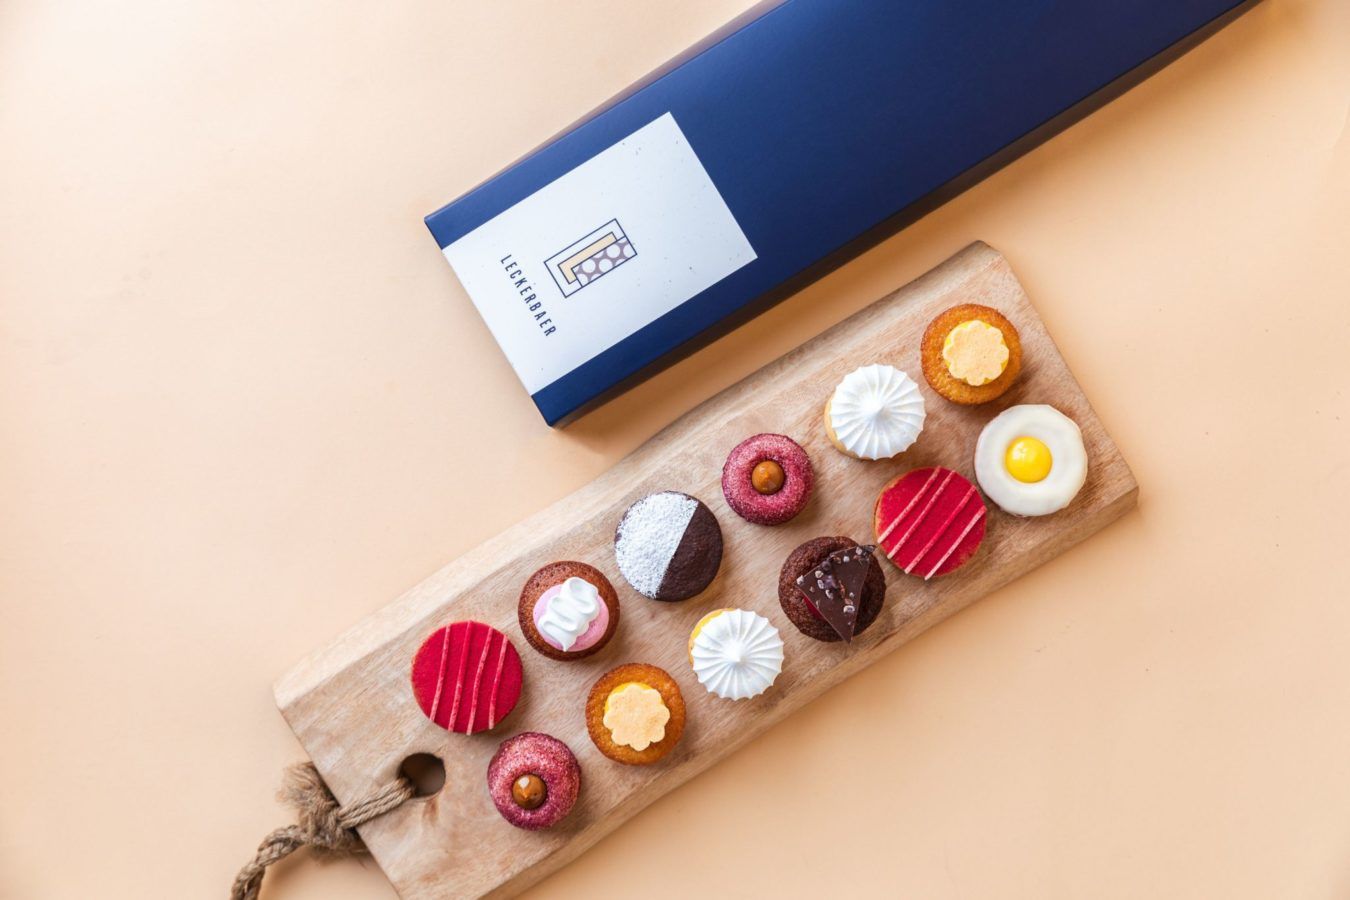 Dessert boxes in Singapore: Get cookies, pastries, cakes and other sweet treats delivered